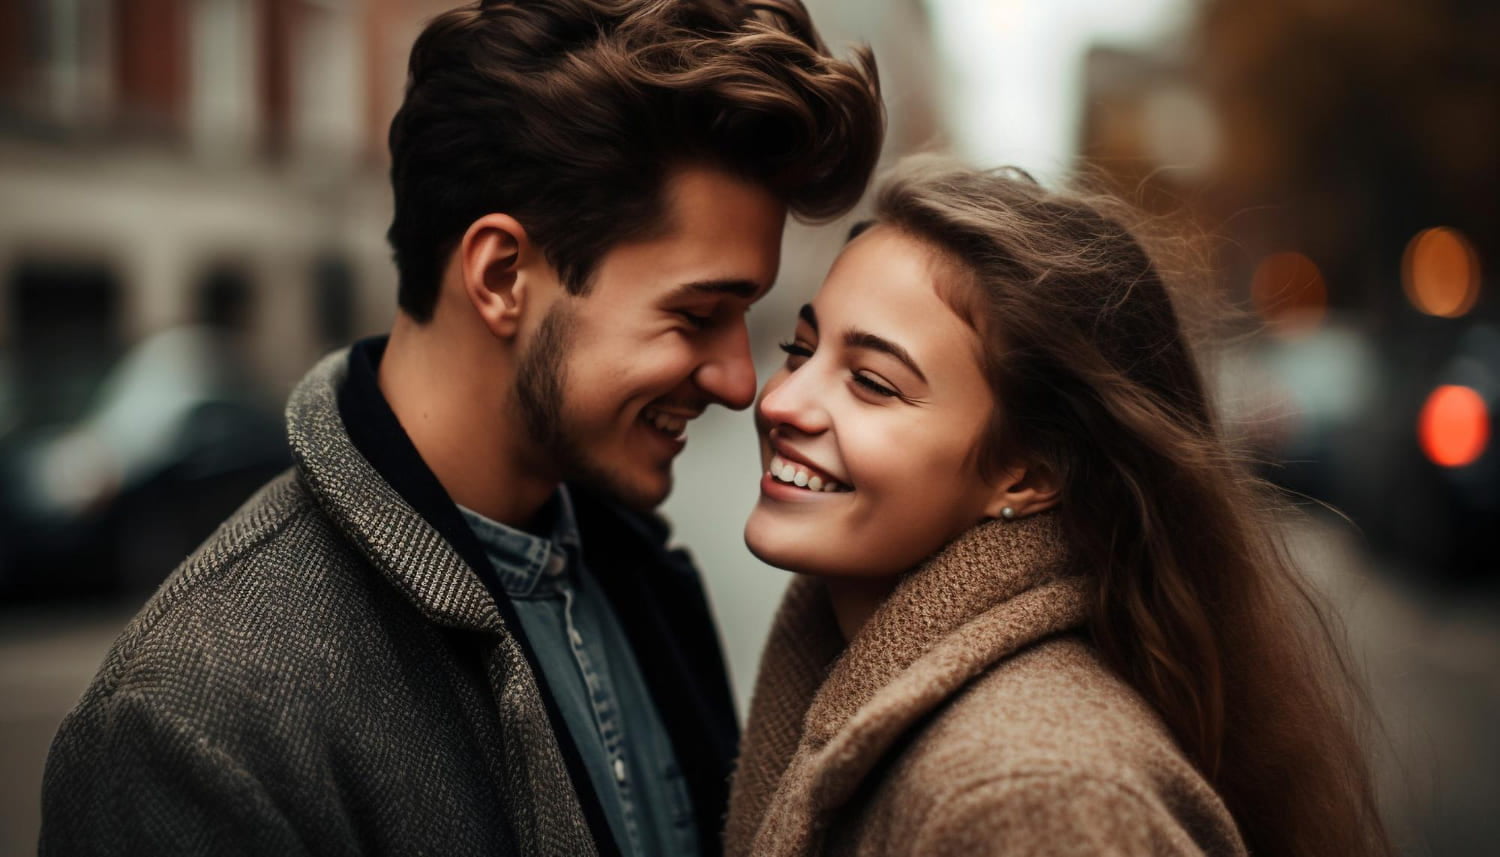 26 Top Best Dating Sites Revealed – Find Your Perfect Match Today